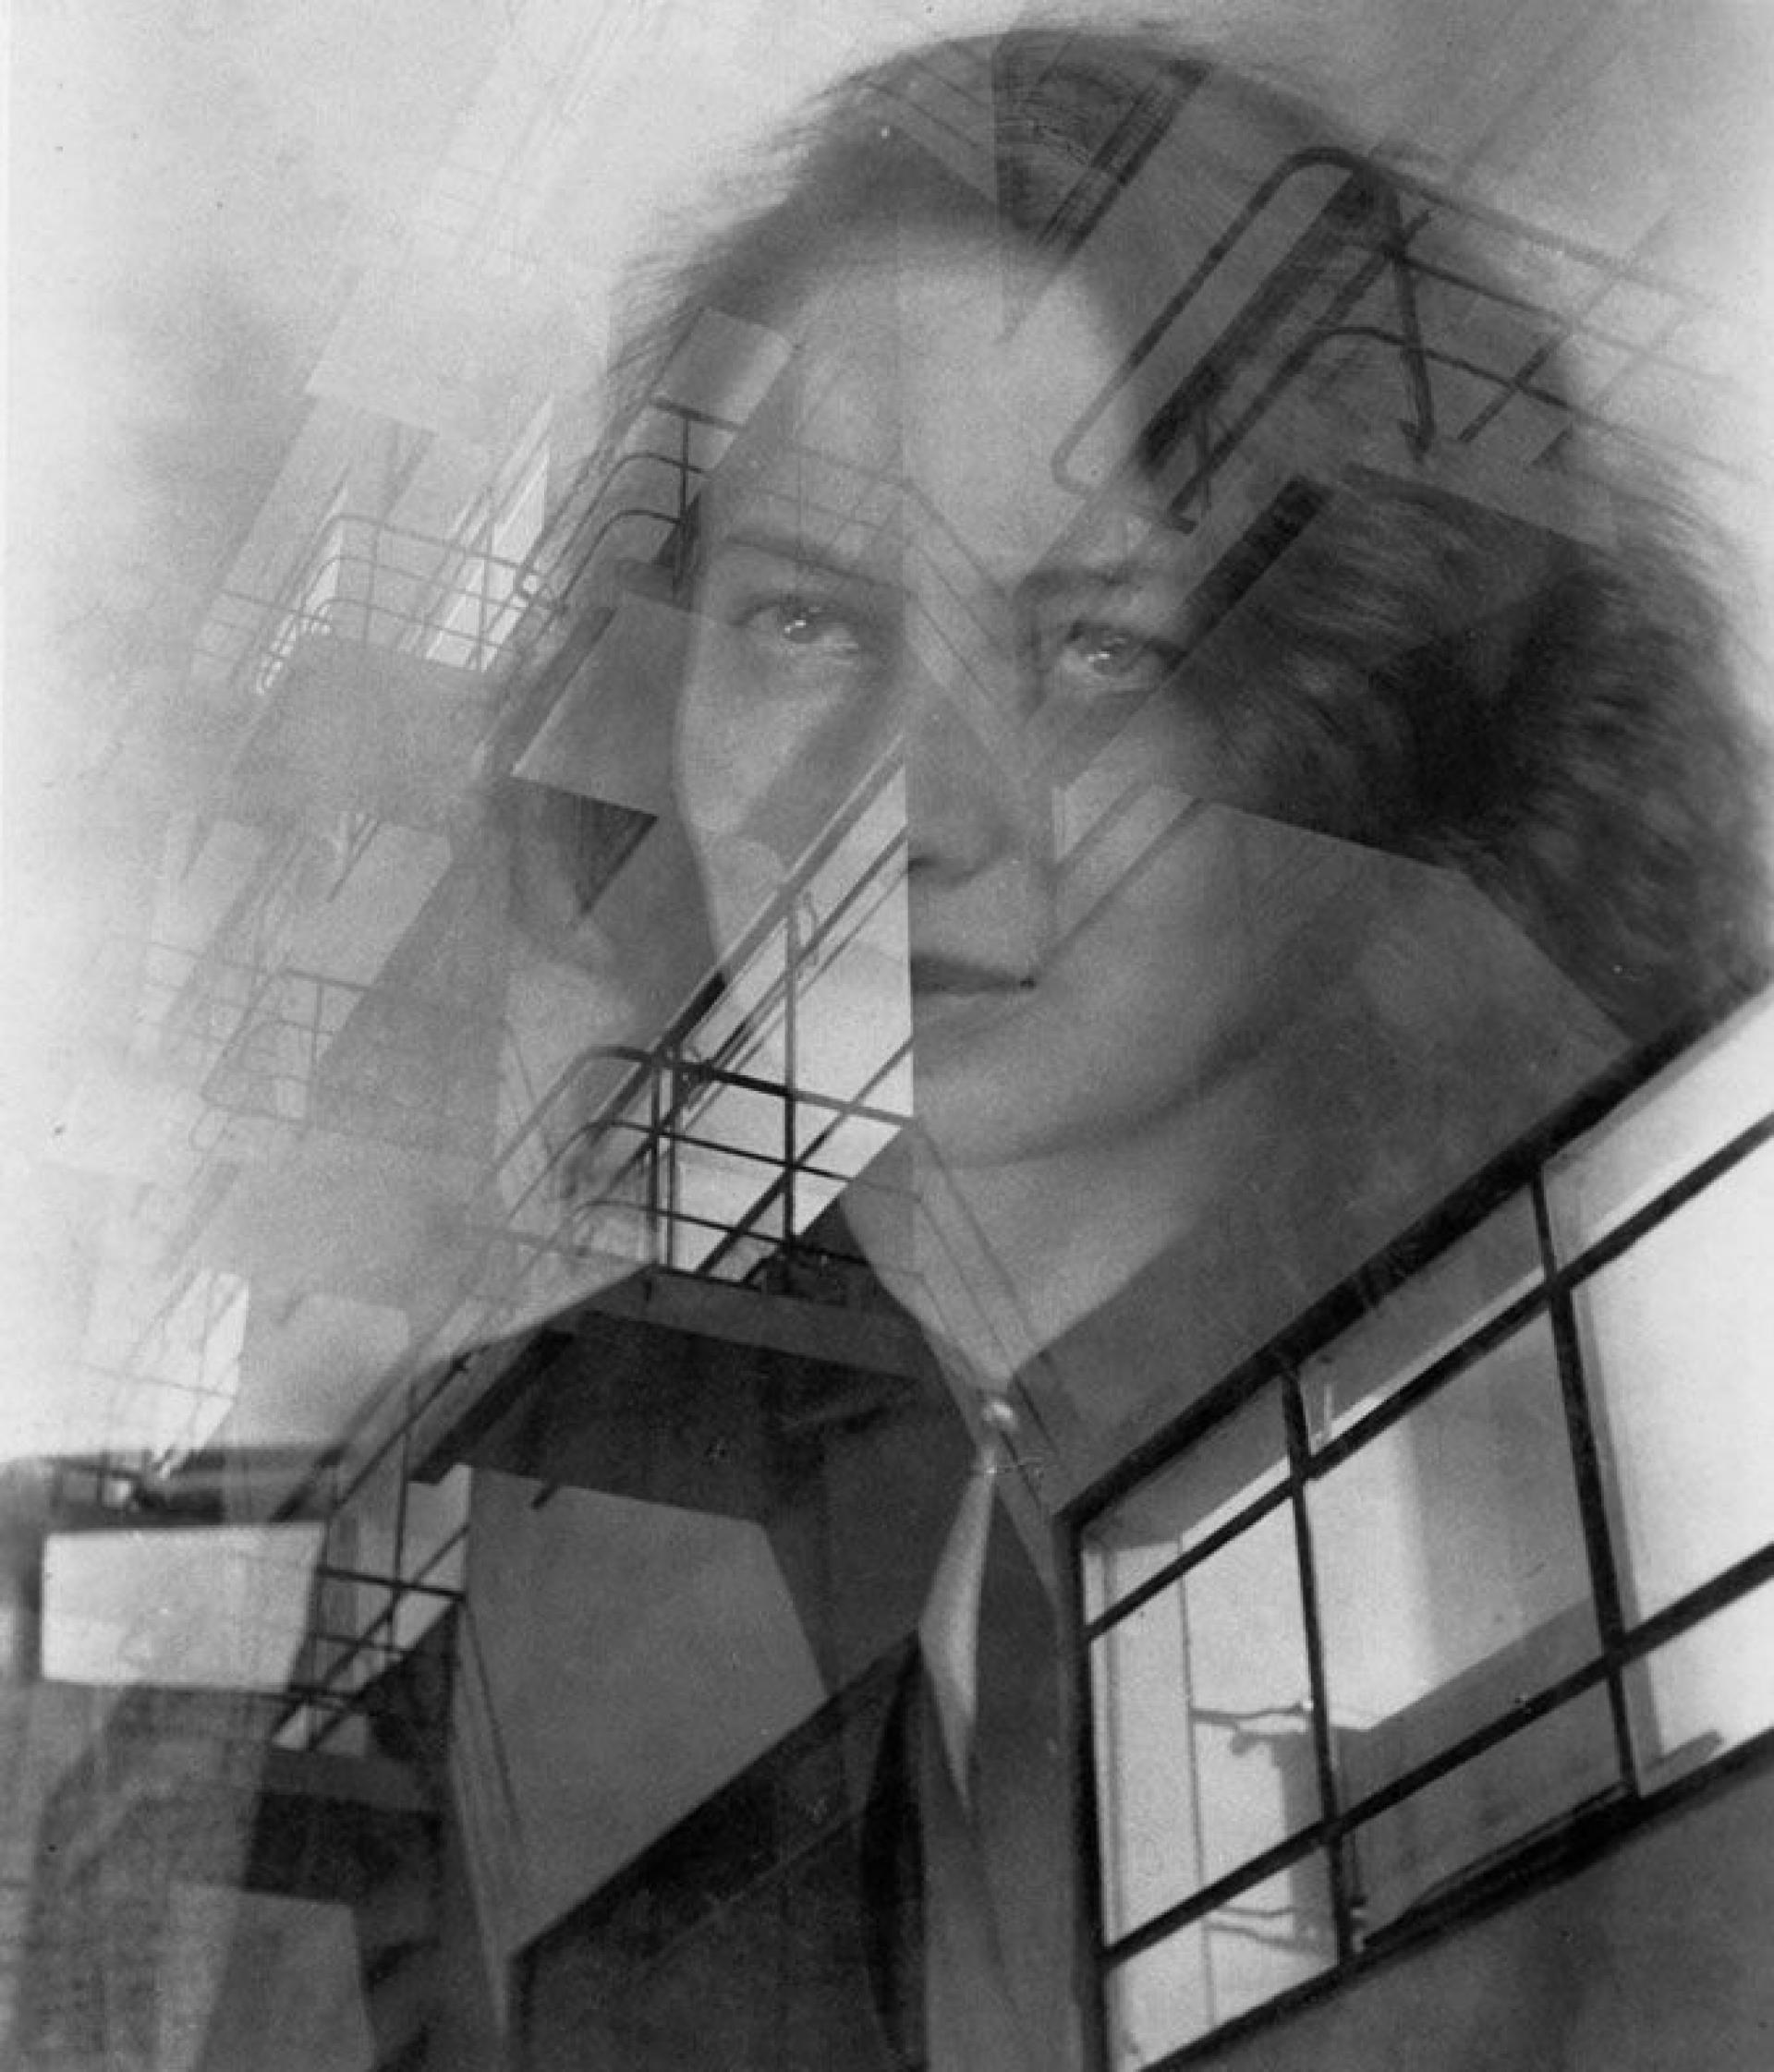 Otti Berger and Atelier Dessau by Lotte Beese (1930). | Photo Jeanine Fiedler